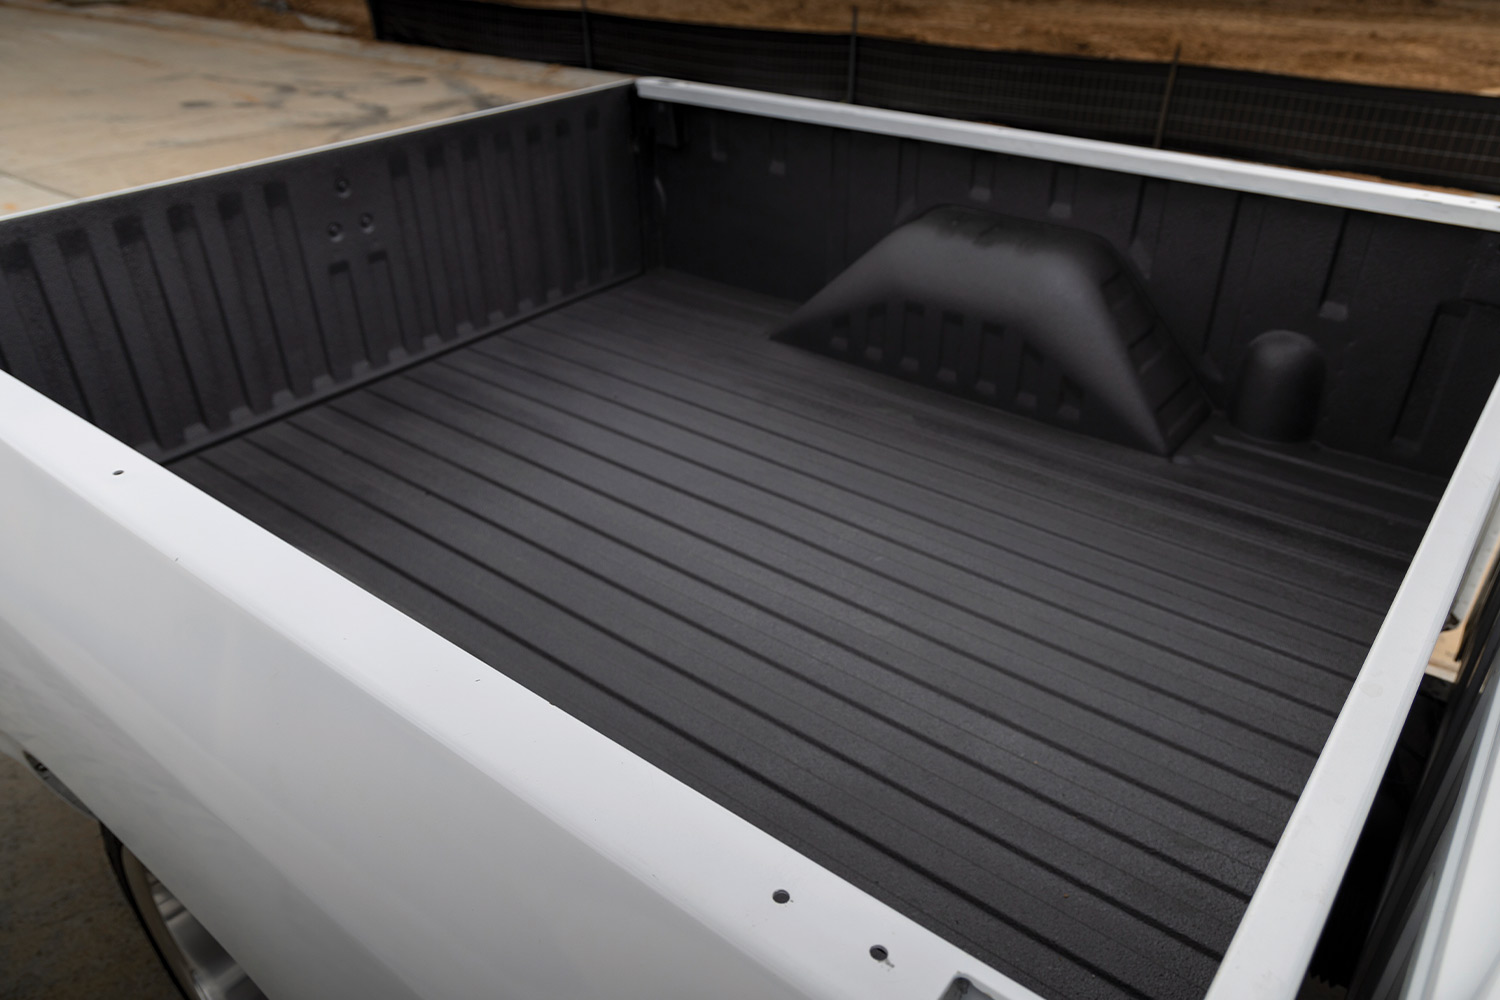 close view of the ’89 Dodge Ram D150's truck bed